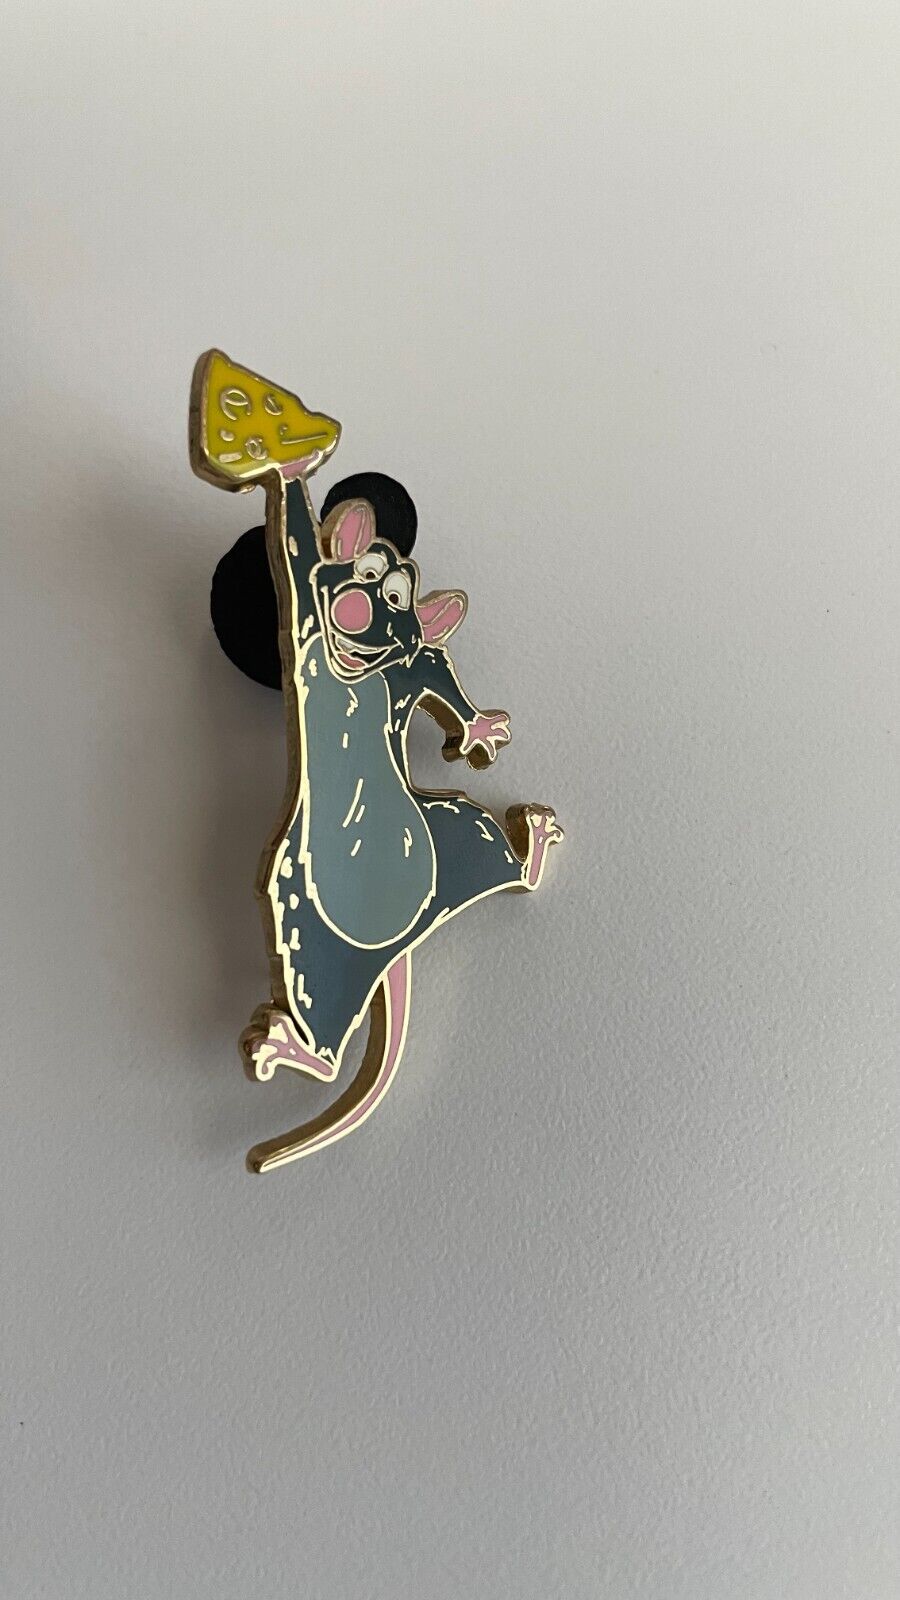 *VERY RARE* 2007 Disney Shopping Ratatouille Remy Holding Cheese Pin LE 250